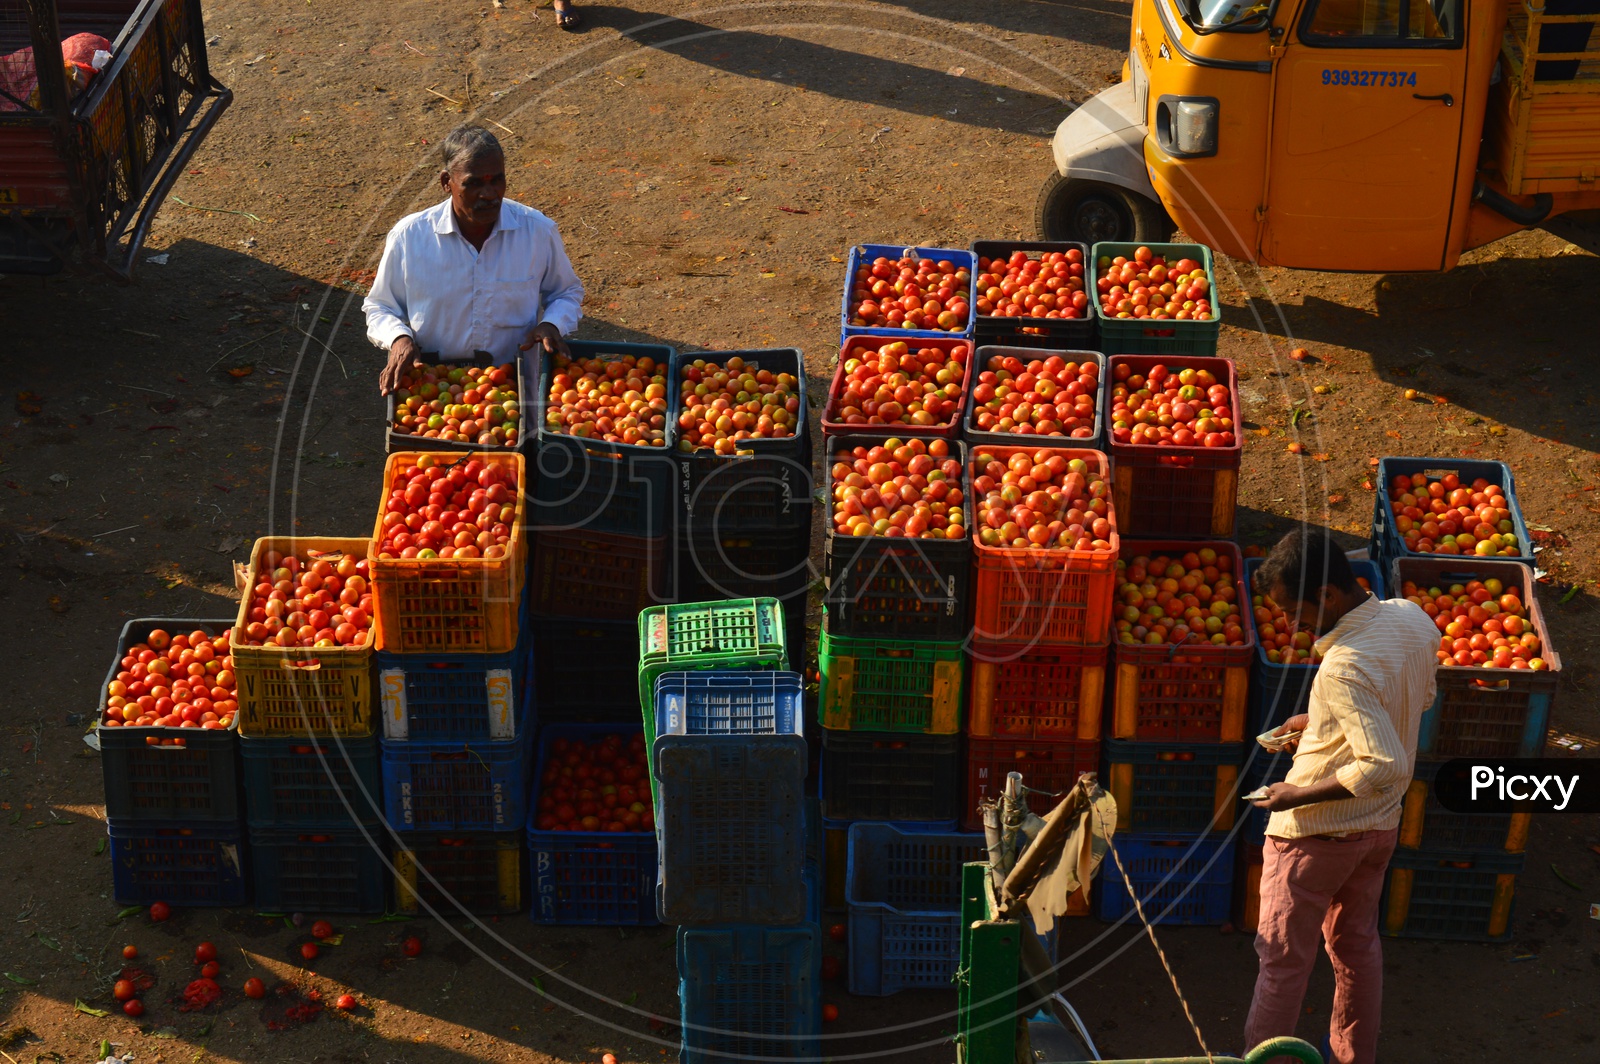 Tomatoes in crates